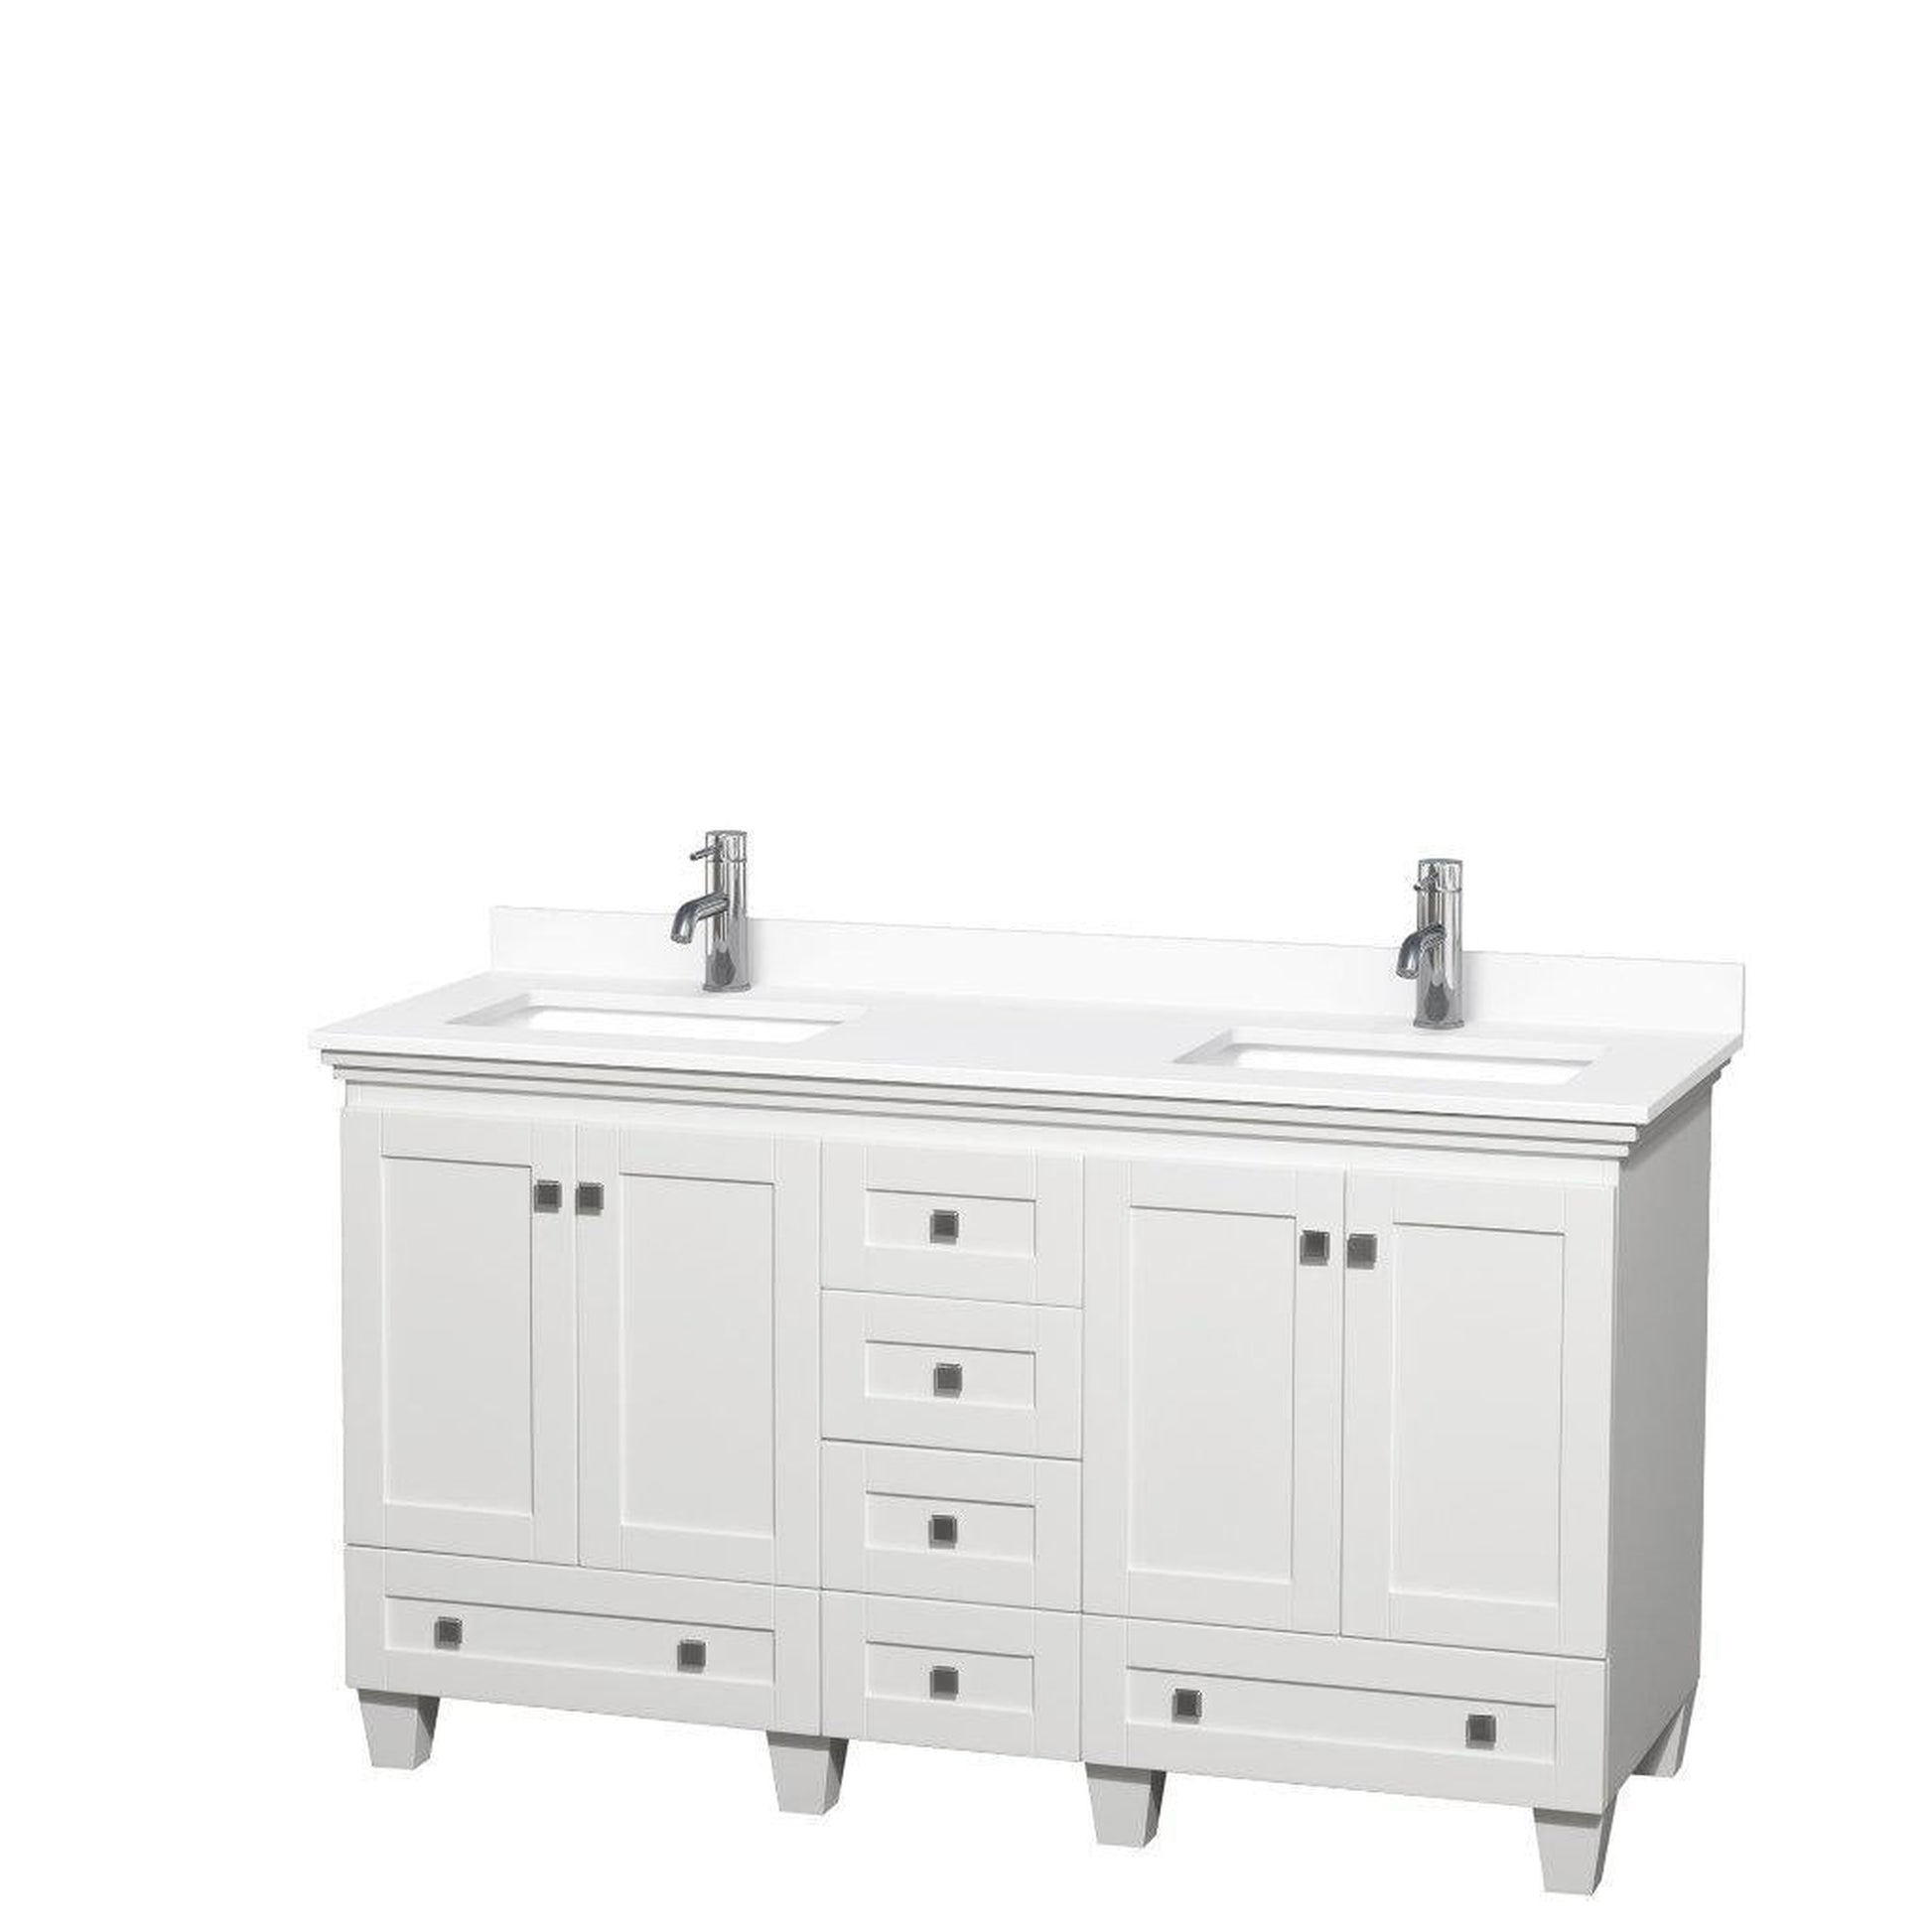 Wyndham Collection Acclaim 60" Double Bathroom White Vanity With White Cultured Marble Countertop And Undermount Square Sinks